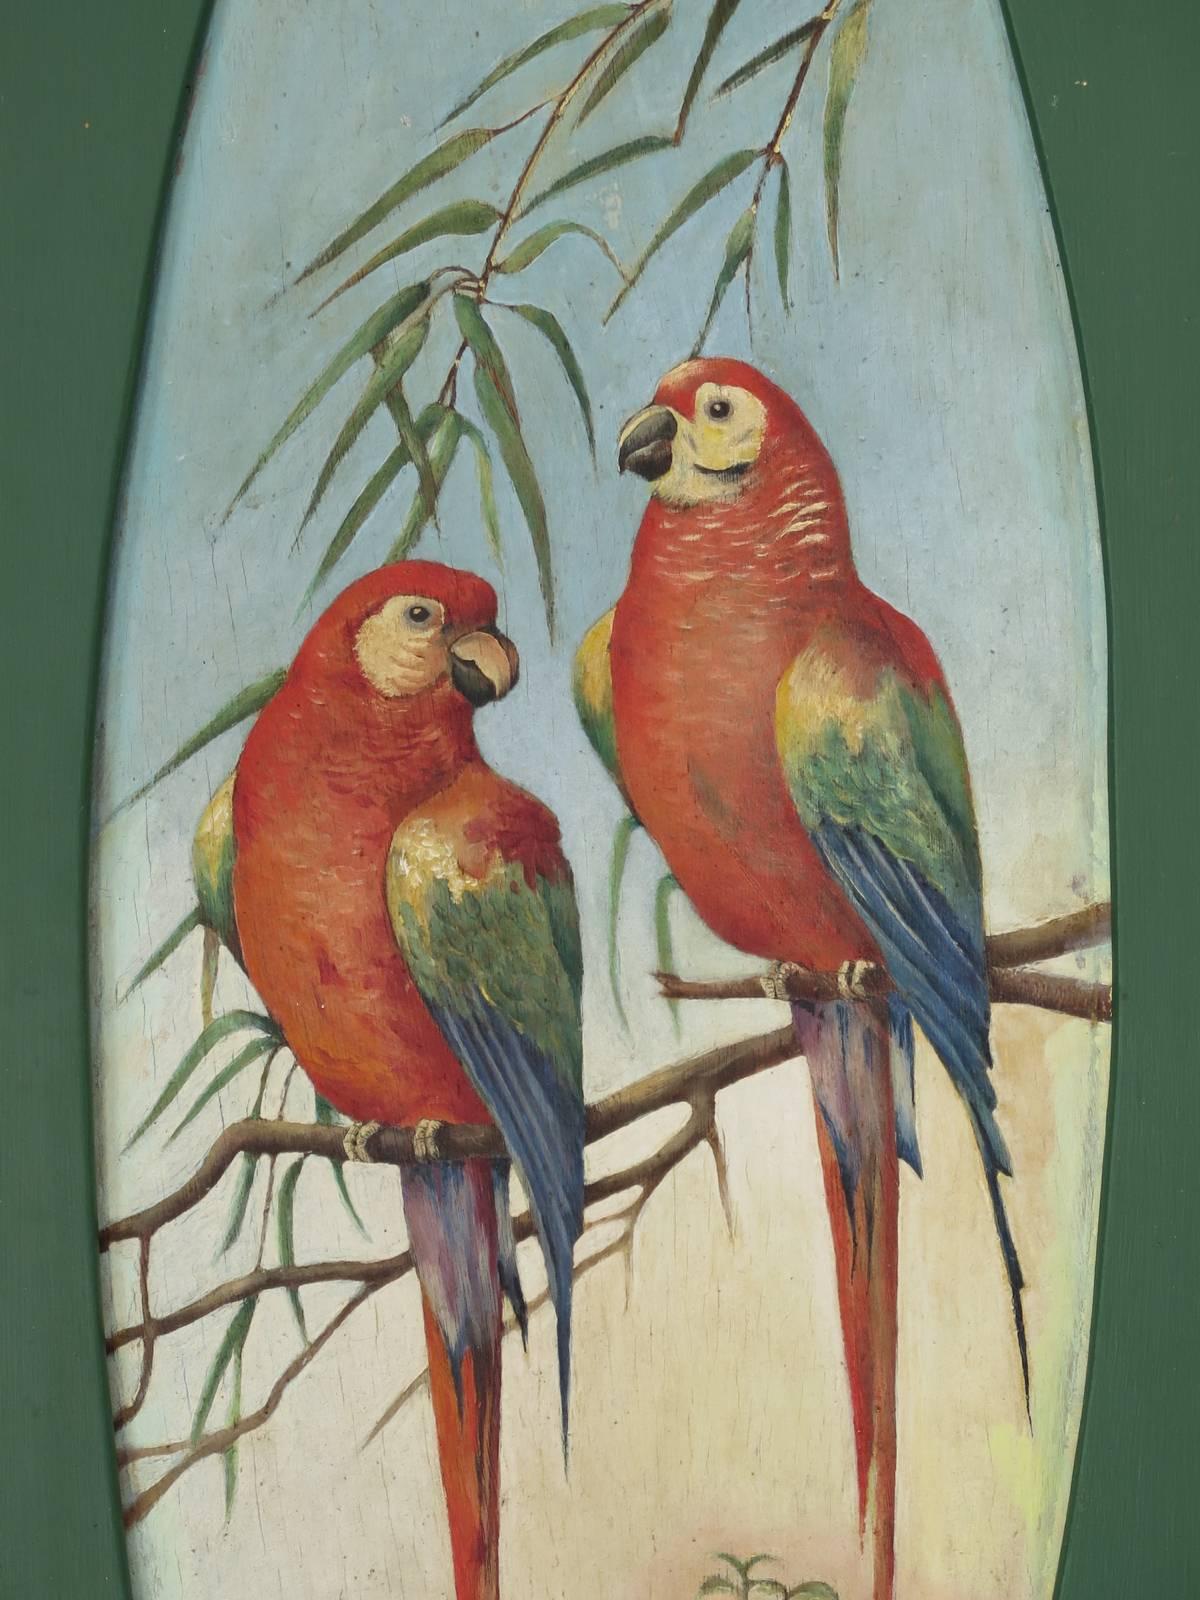 Lovely pair of paintings on wood boards, each representing a colourful pair of parrots, in an oval medallion.